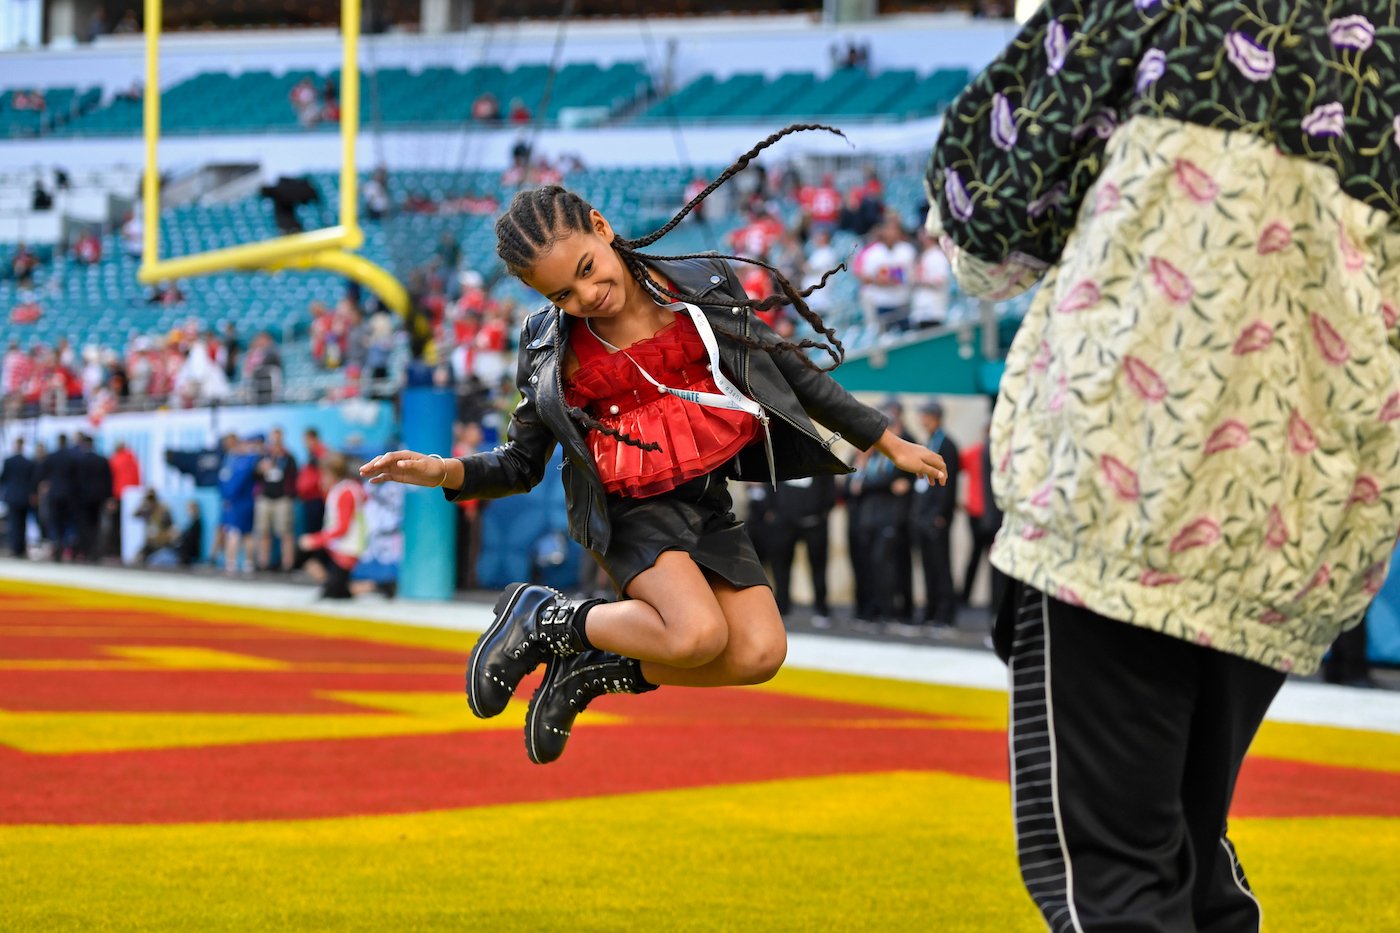 Jay-Z photographs his daughter Blue Ivy Carter as she jumps in the end zone before Super Bowl LIV